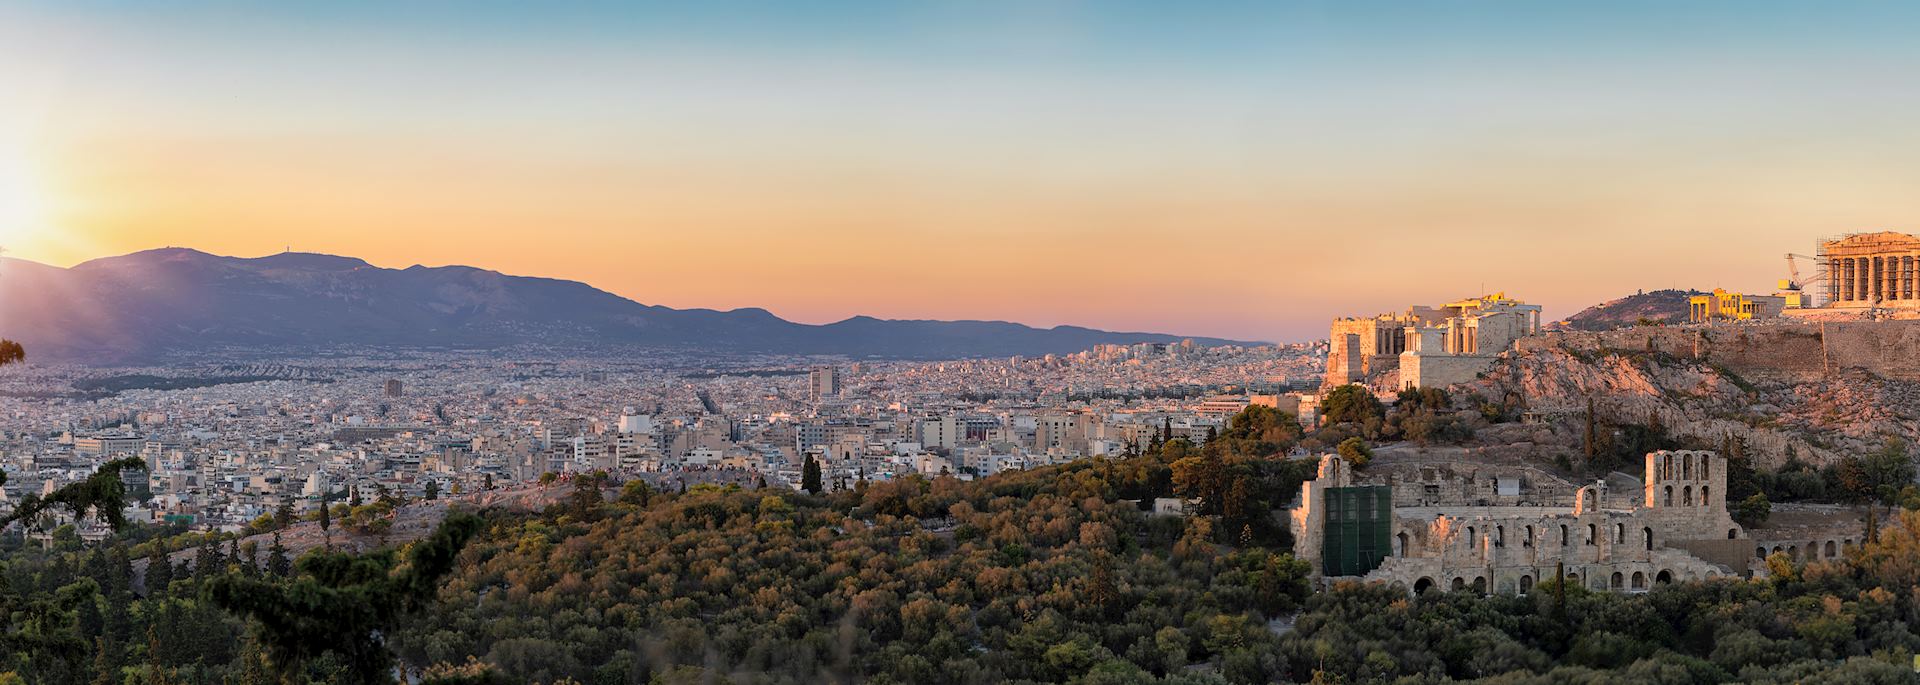 Panorama from the Parthenon and Acropolis to the skyline of Athens